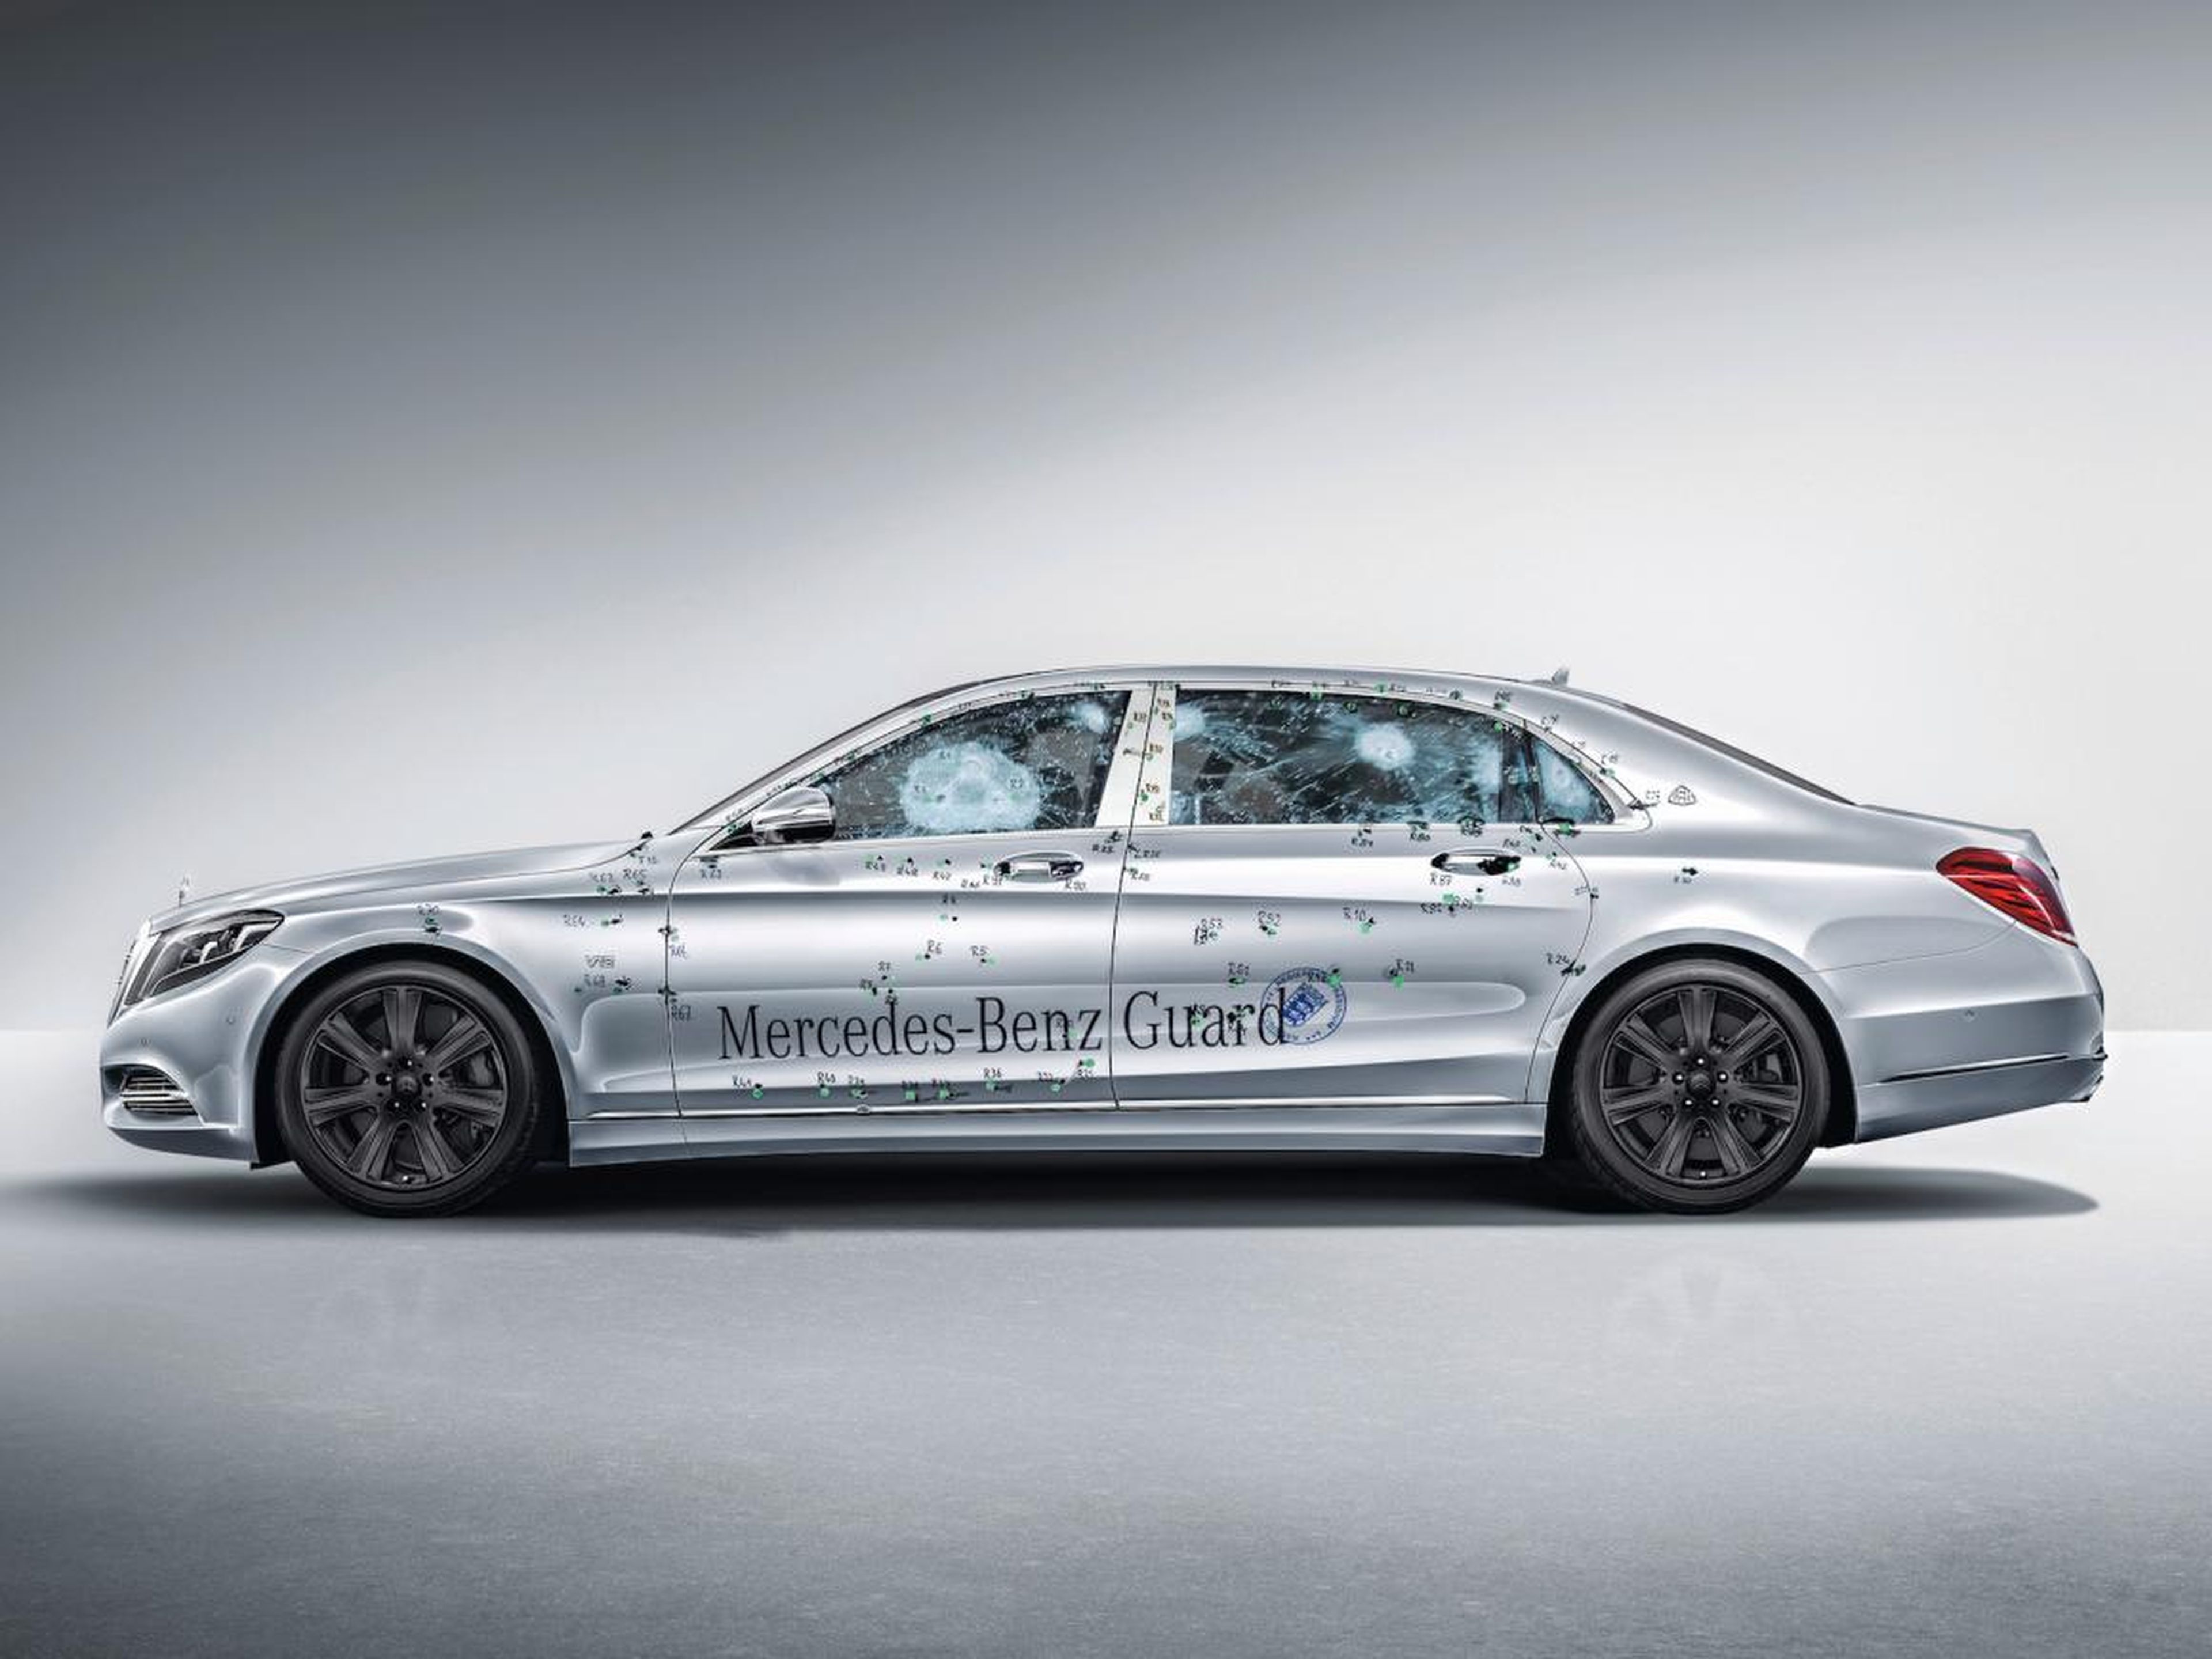 In addition, the ultra-thick laminated-glass windows have been coated with polycarbonate on the inside to prevent splintering. According to Mercedes, the Pullman Guard is certified at resistance class VR9 and blastproof to comply